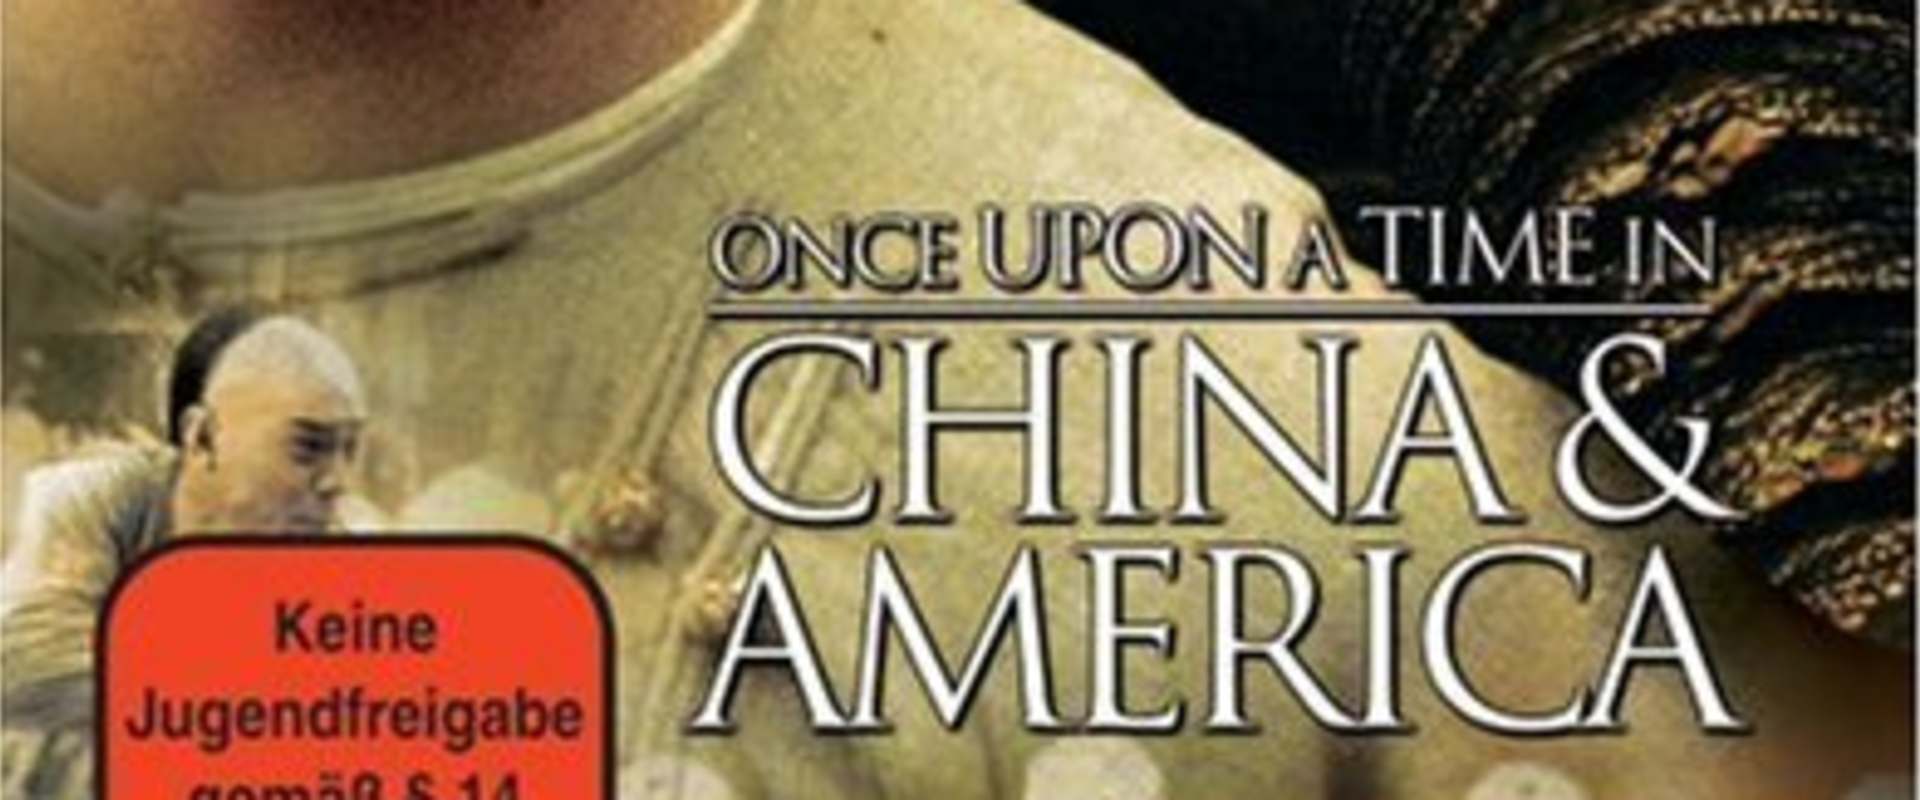 Once Upon a Time in China and America background 1